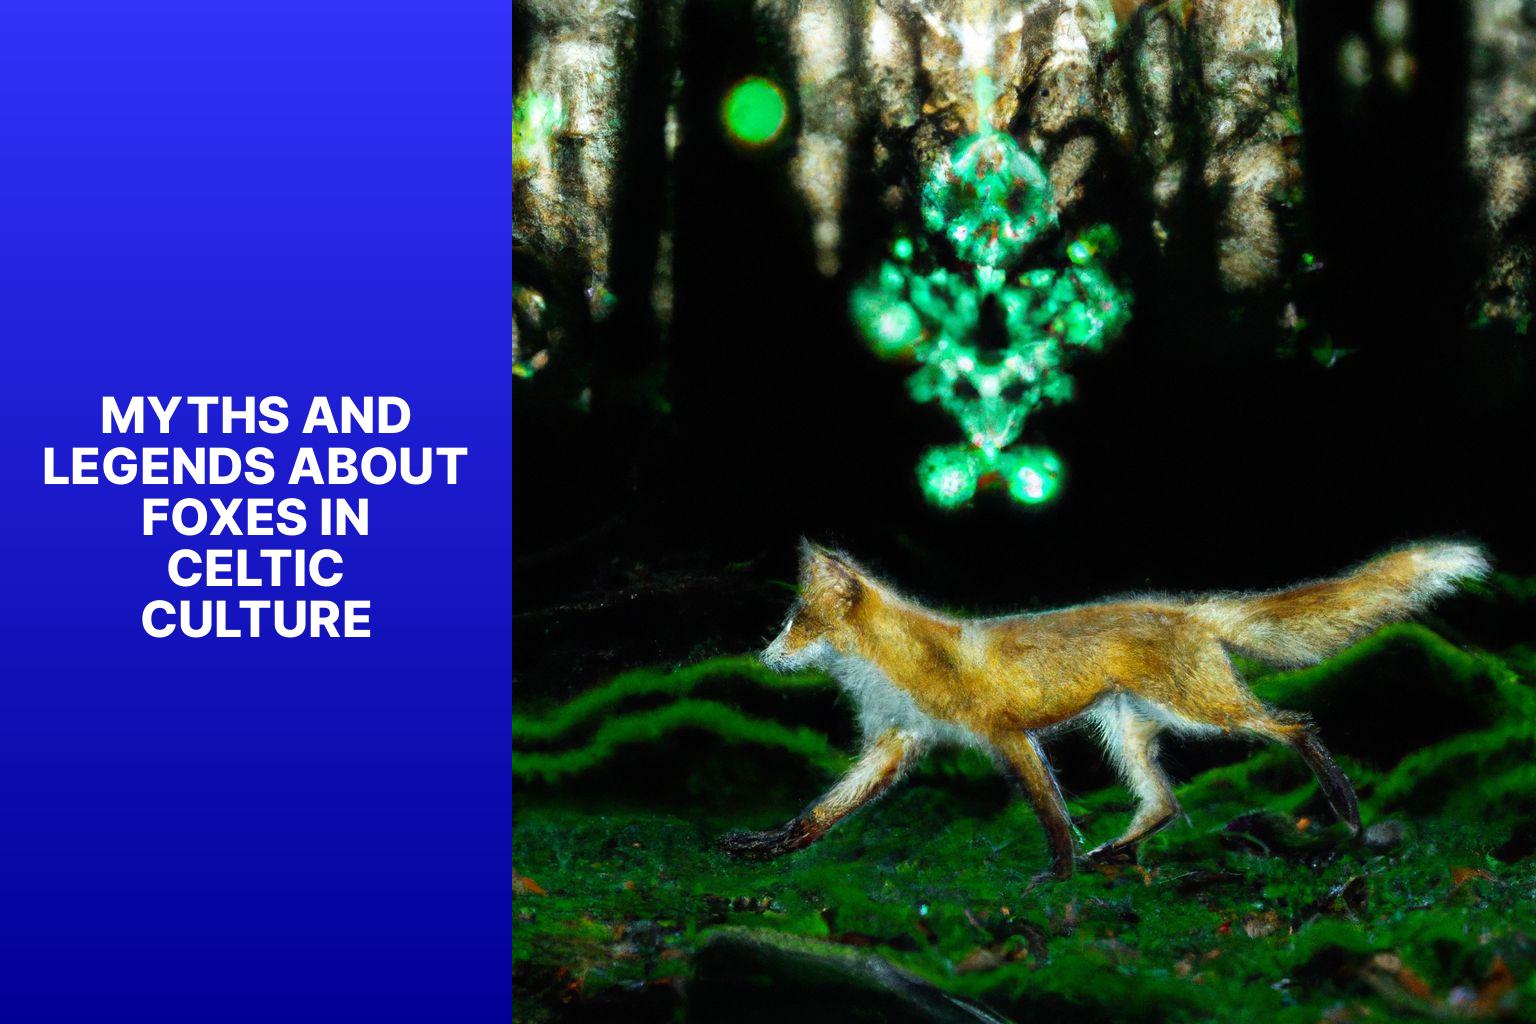 Myths and Legends about Foxes in Celtic Culture - Fox Myths in Celtic Culture 